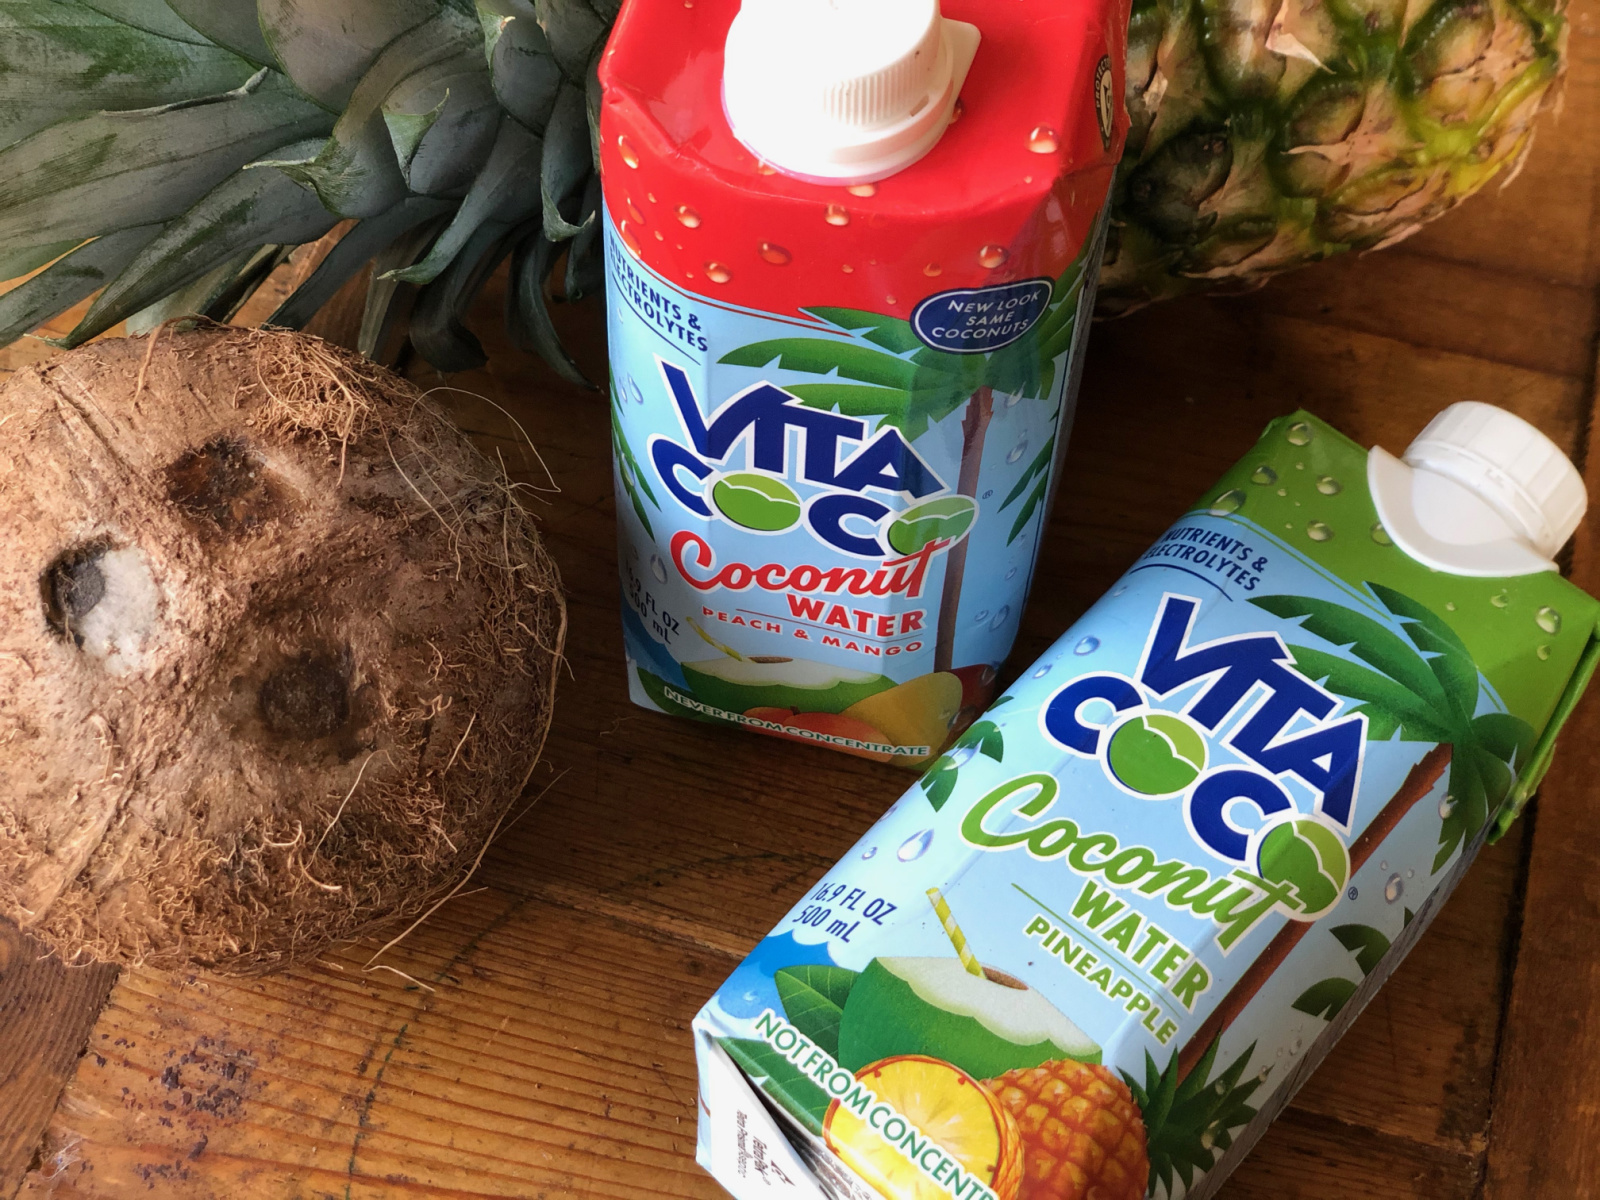 Vita Coco Coconut Water Is Just 97¢ At Kroger – Less Than Half Price